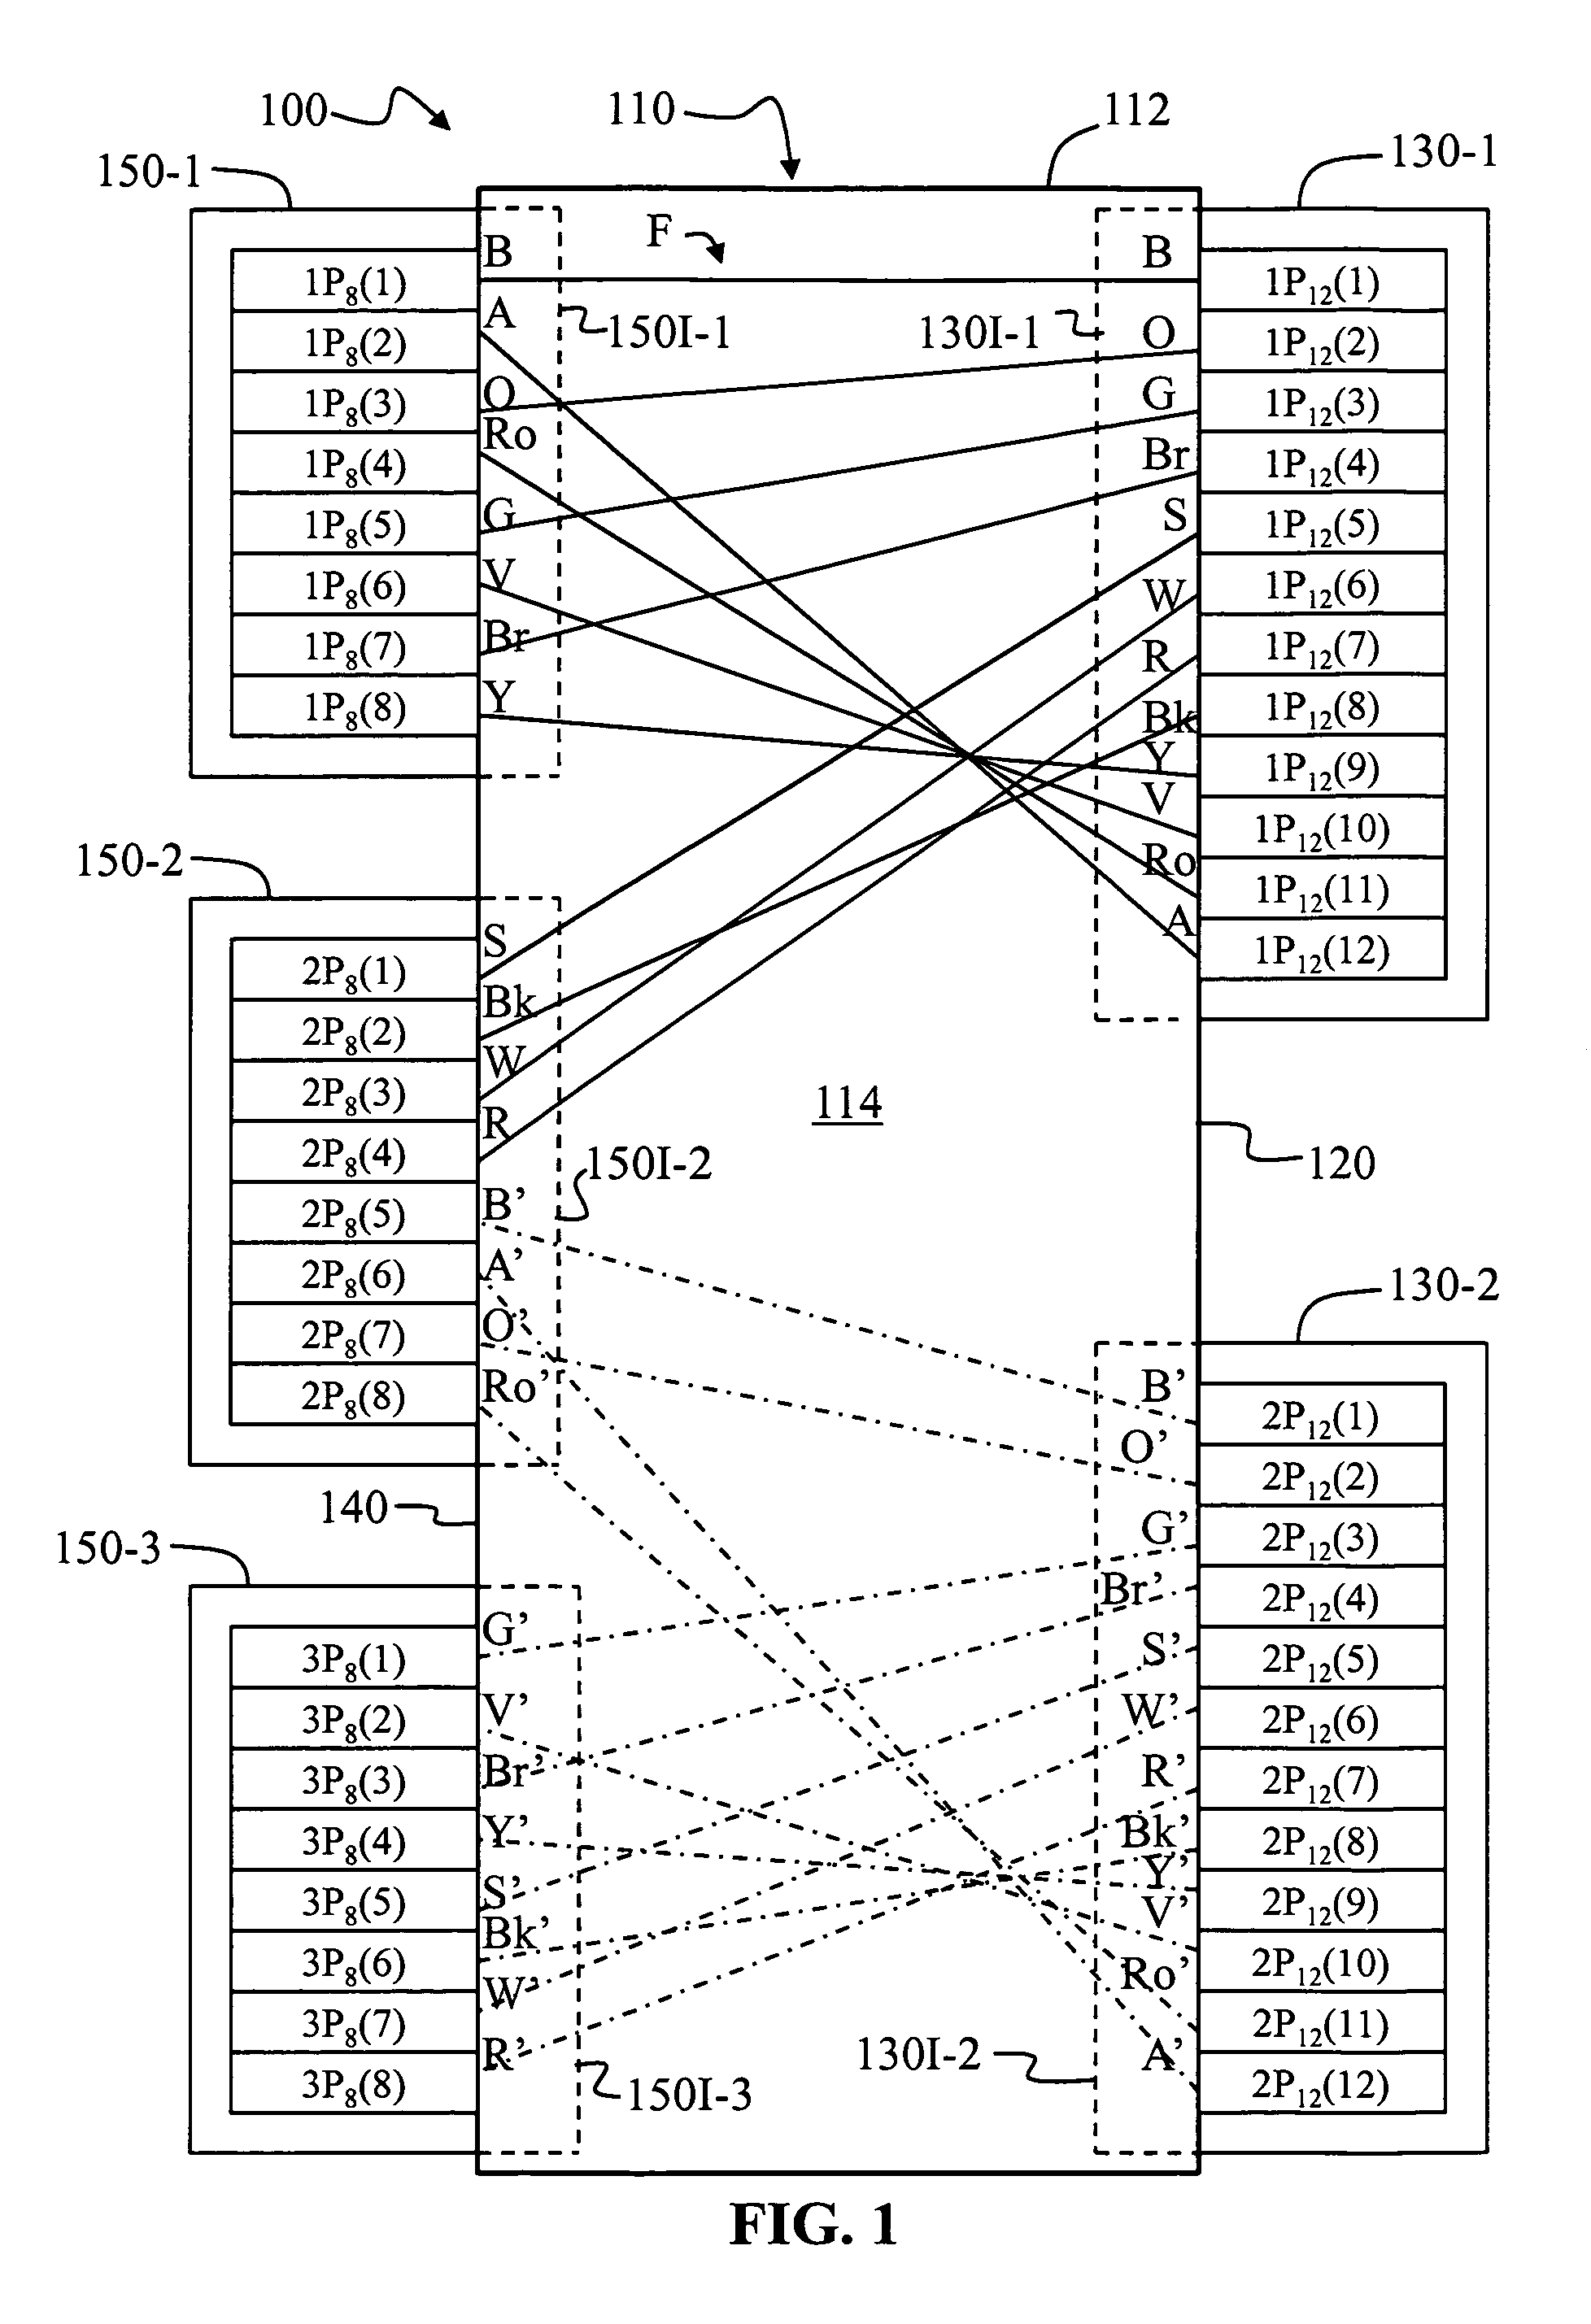 Optical fiber interconnection devices and systems using same